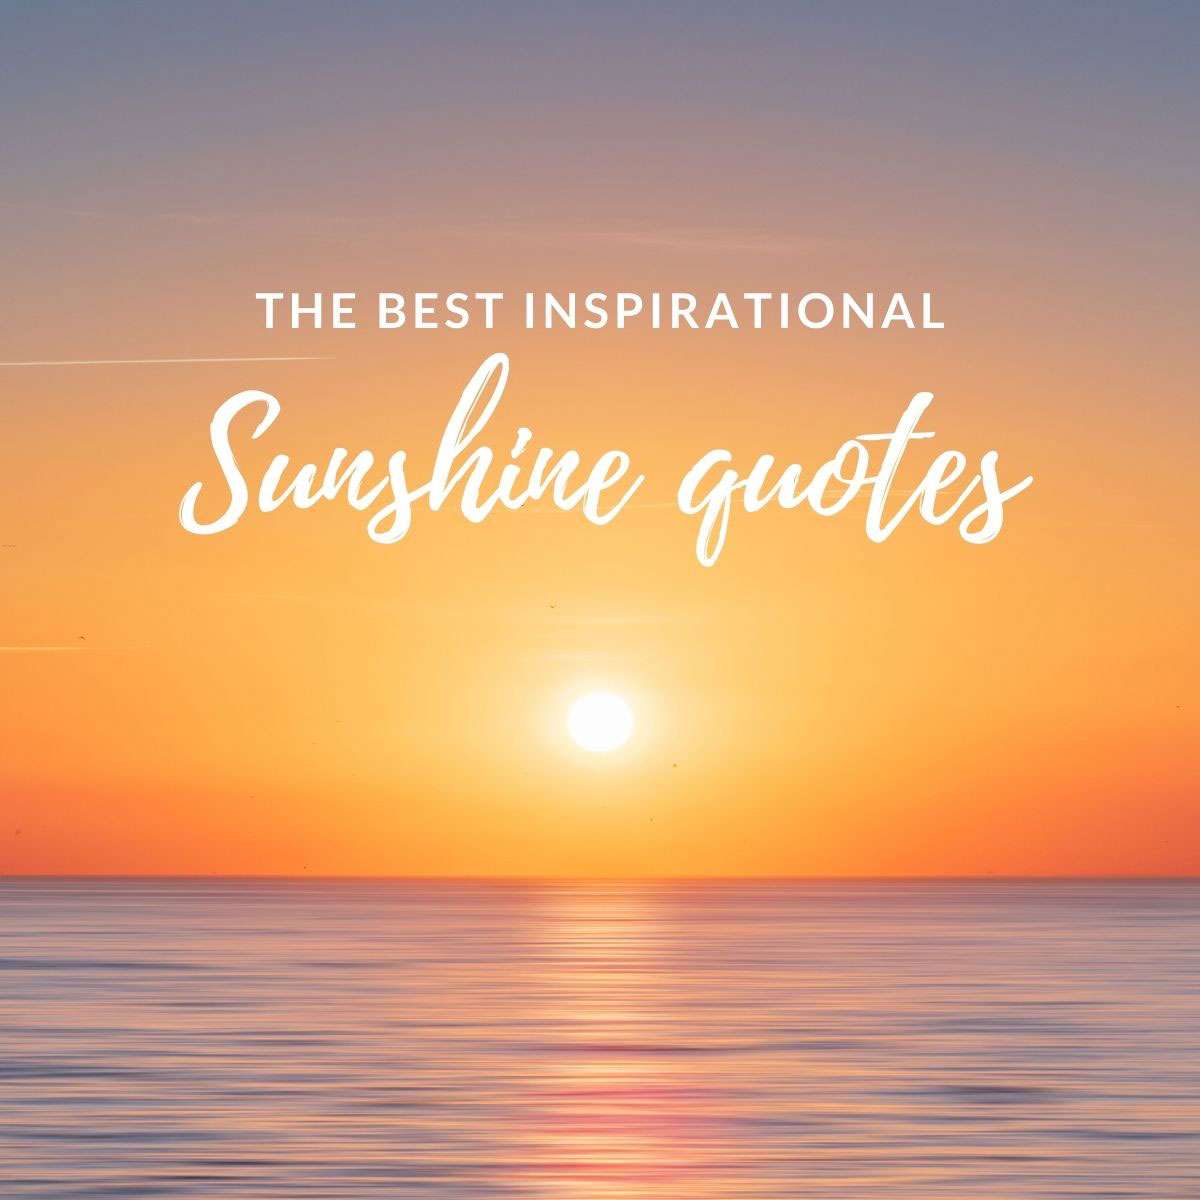 285 Quotes About Sunshine to Brighten Your Day and Lift Your Spirit -  Coastal Wandering